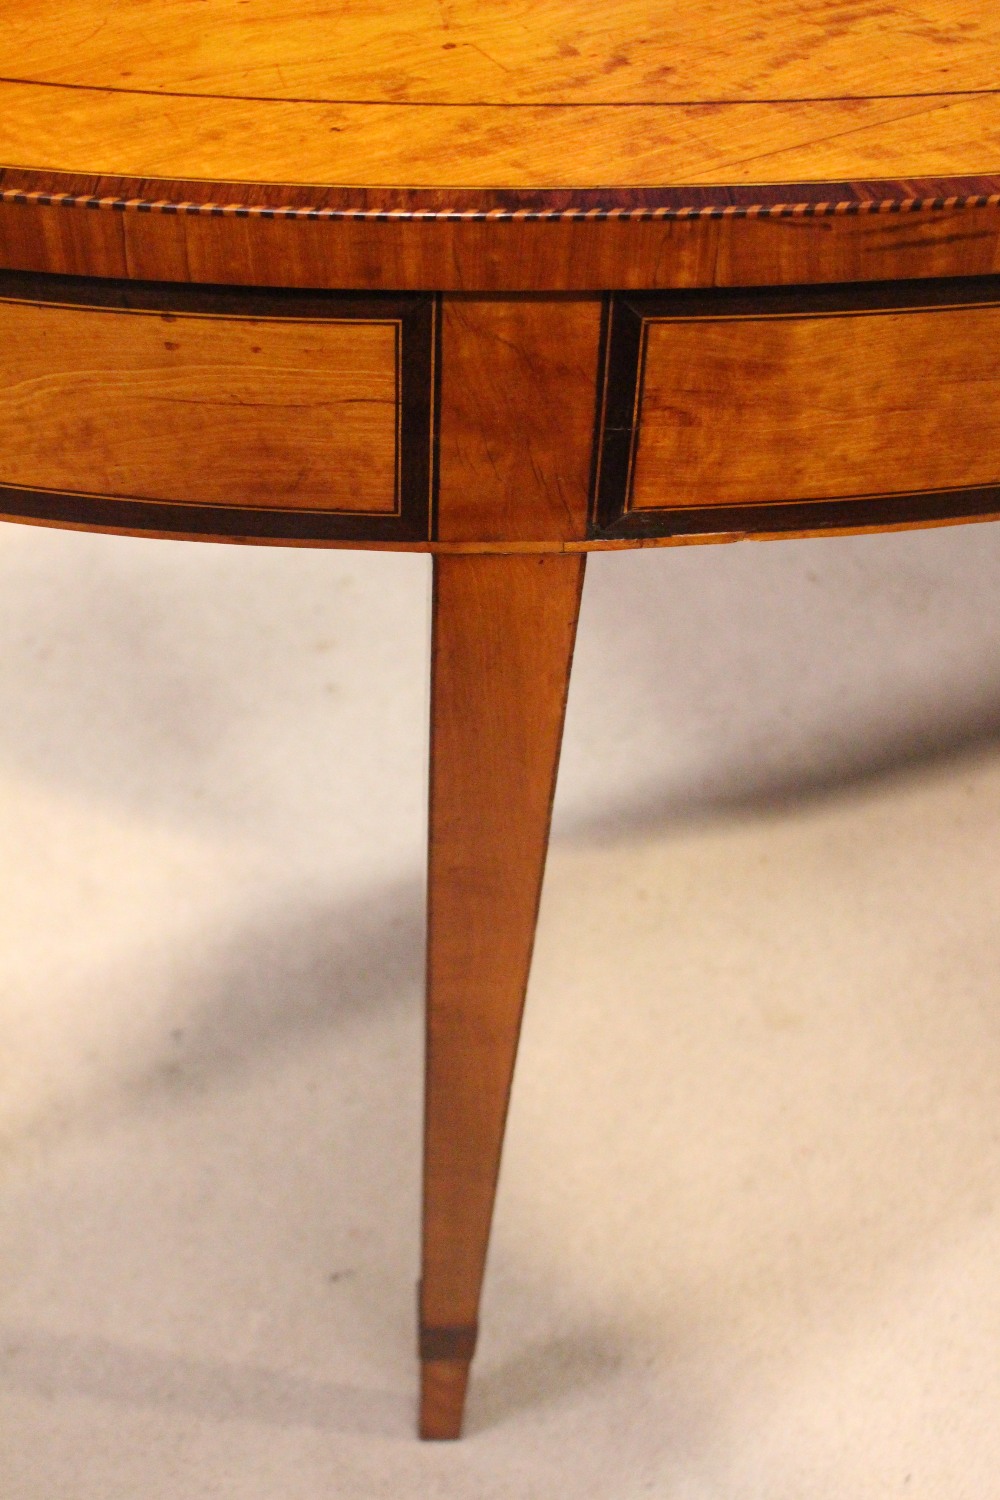 A VERY FINE IRISH 19TH CENTURY ‘ELLIPTICAL’ SIDE TABLE, with marquetry inlaid detail to the - Image 4 of 5